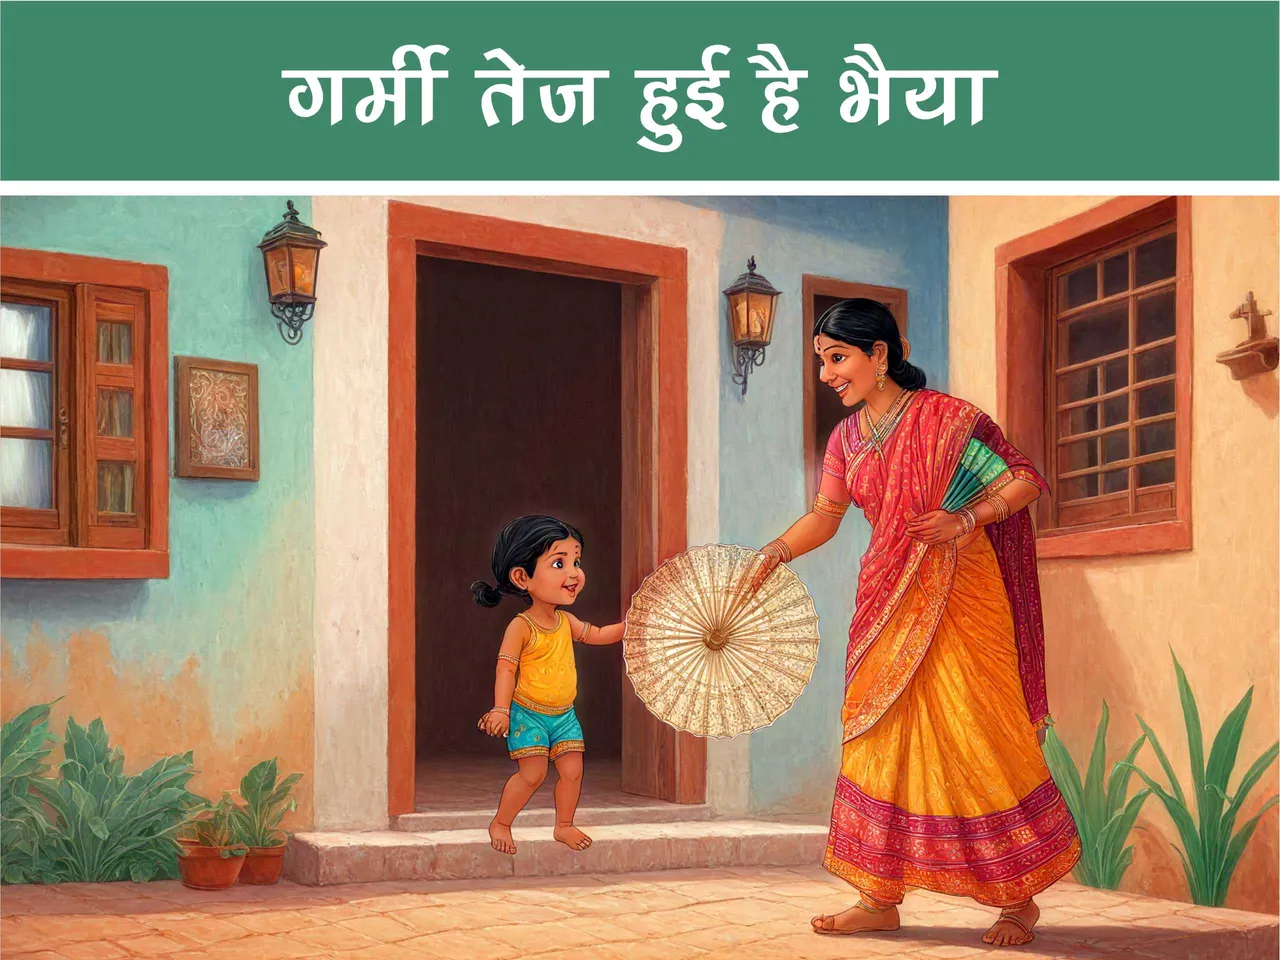 Cartoon image of a kid with her mother